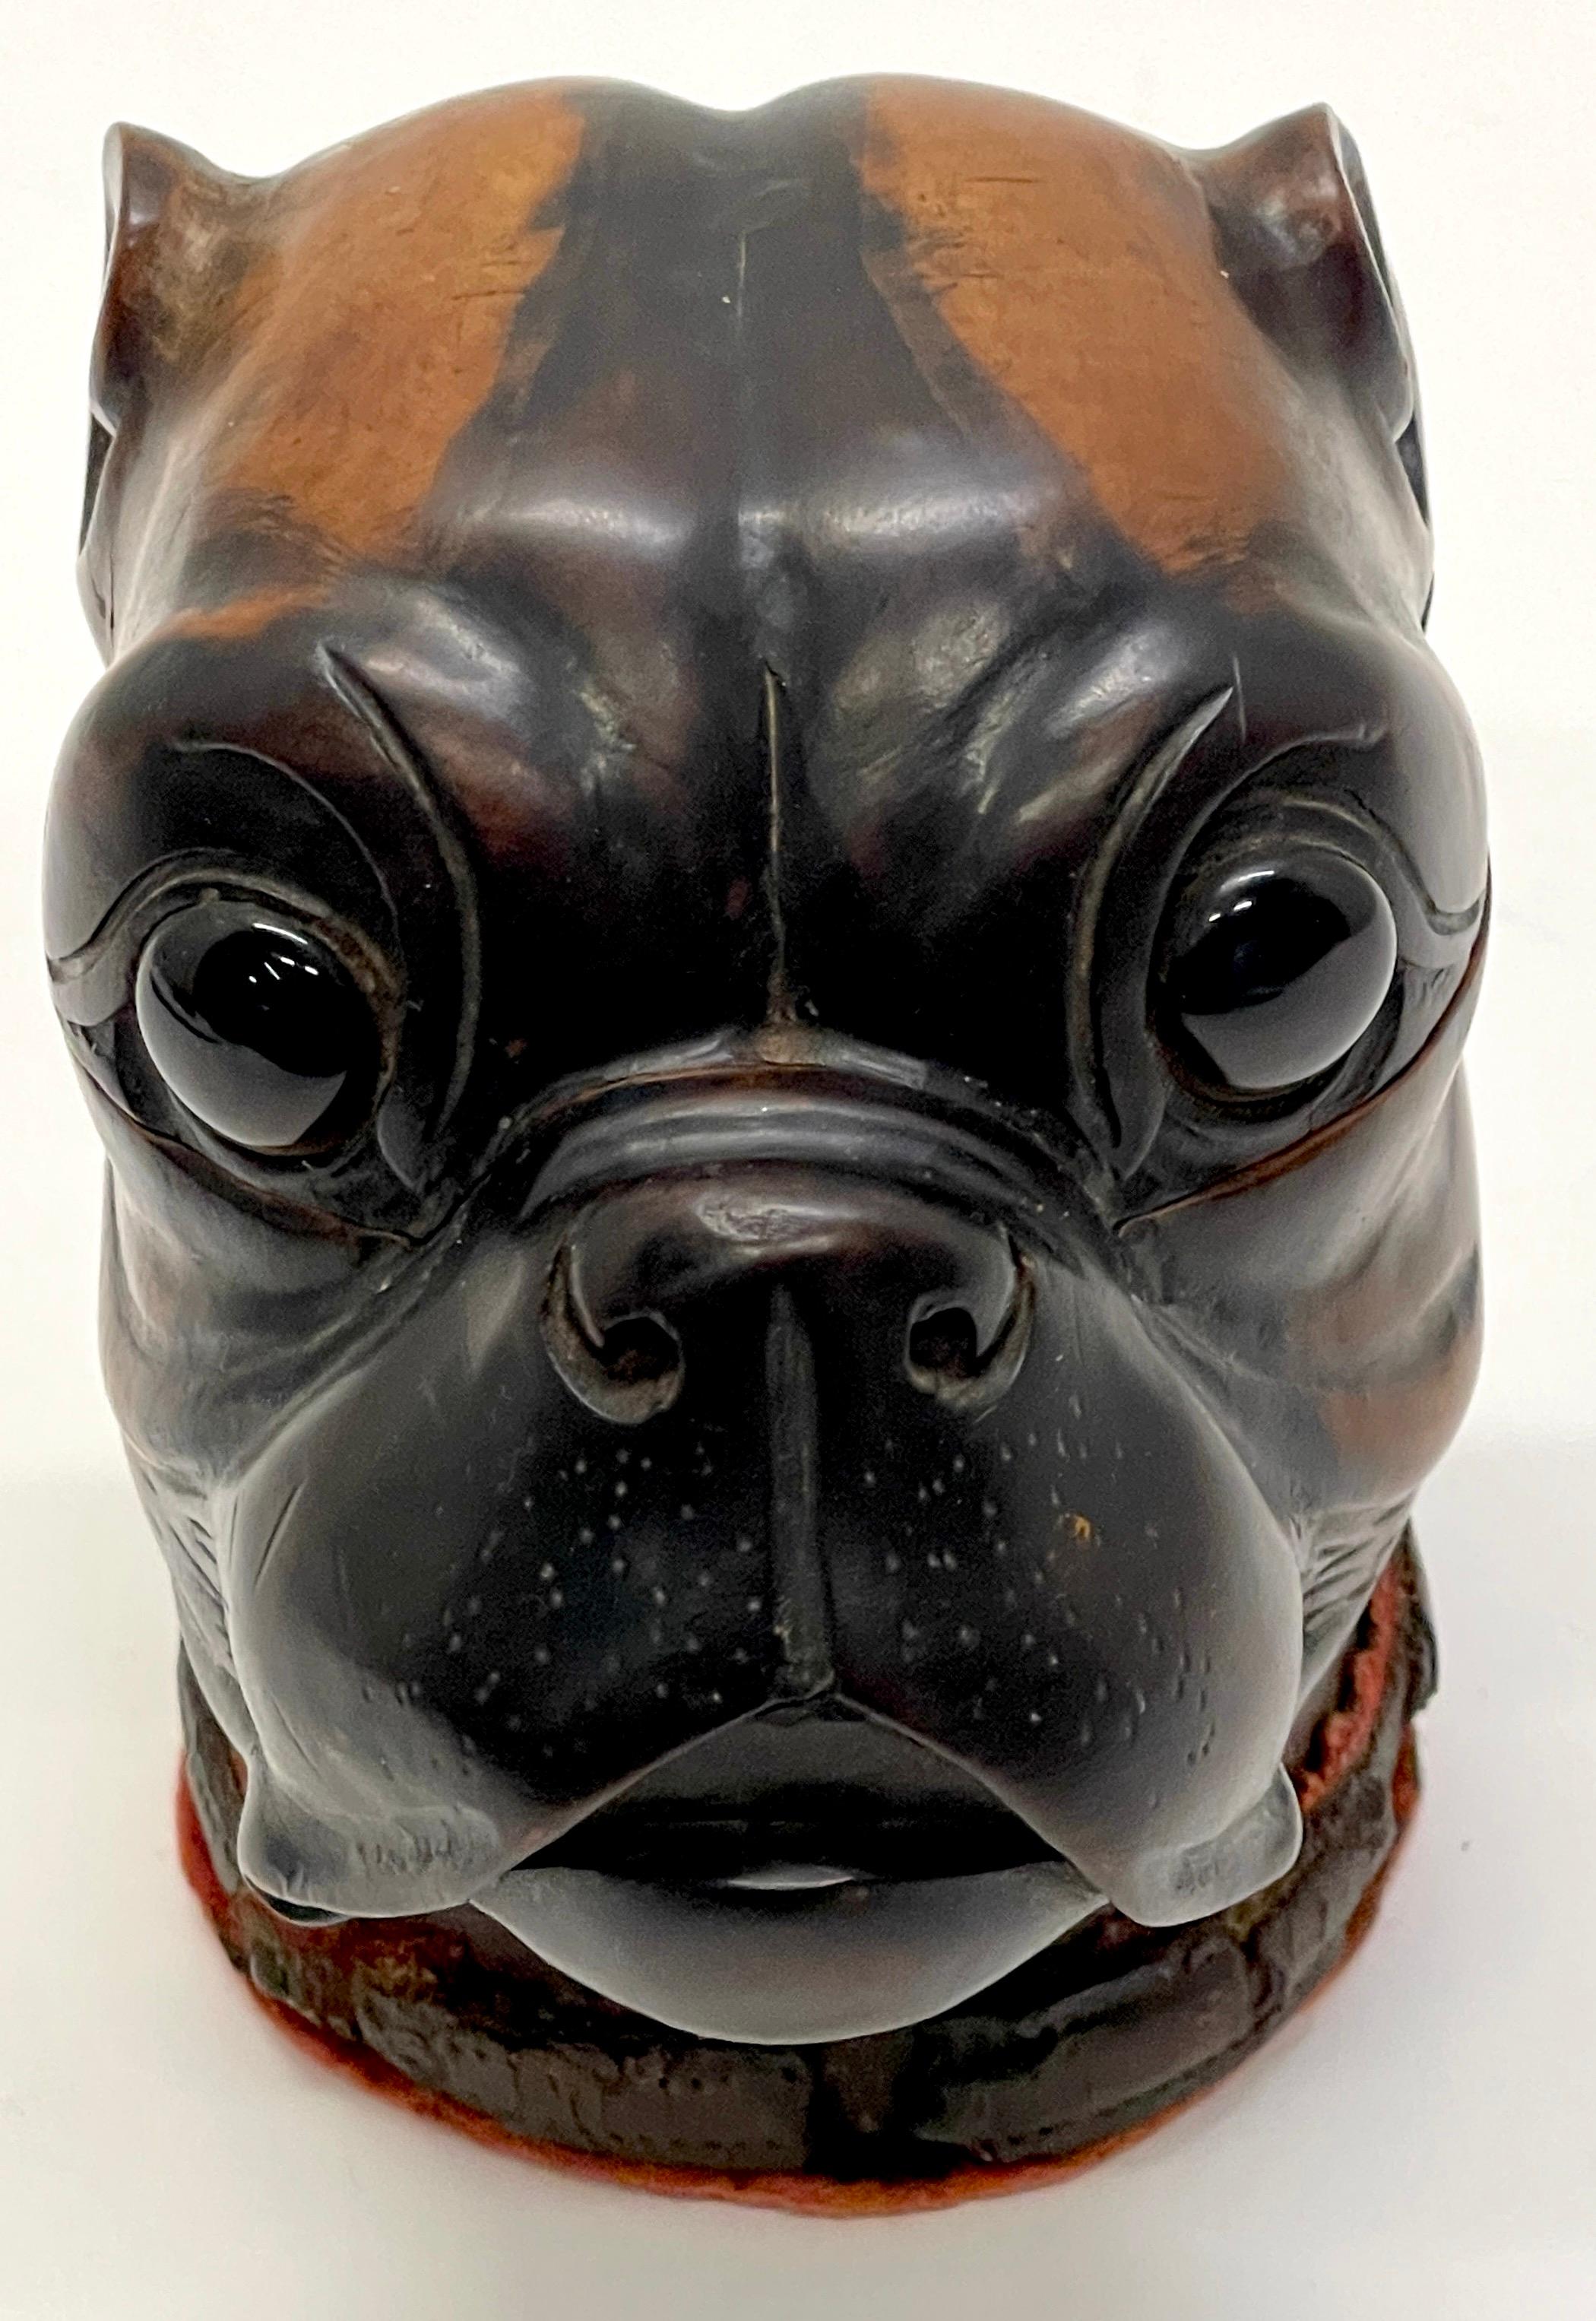 19th century Victorian Lignum Vitae Bull/Pug Dog Inkwell
England, circa 1860s

Presenting a remarkable 19th-century Victorian Lignum Vitae Bull/Pug Dog Inkwell, originating from England and dating back to the 1860s. This inkwell is a fine example of